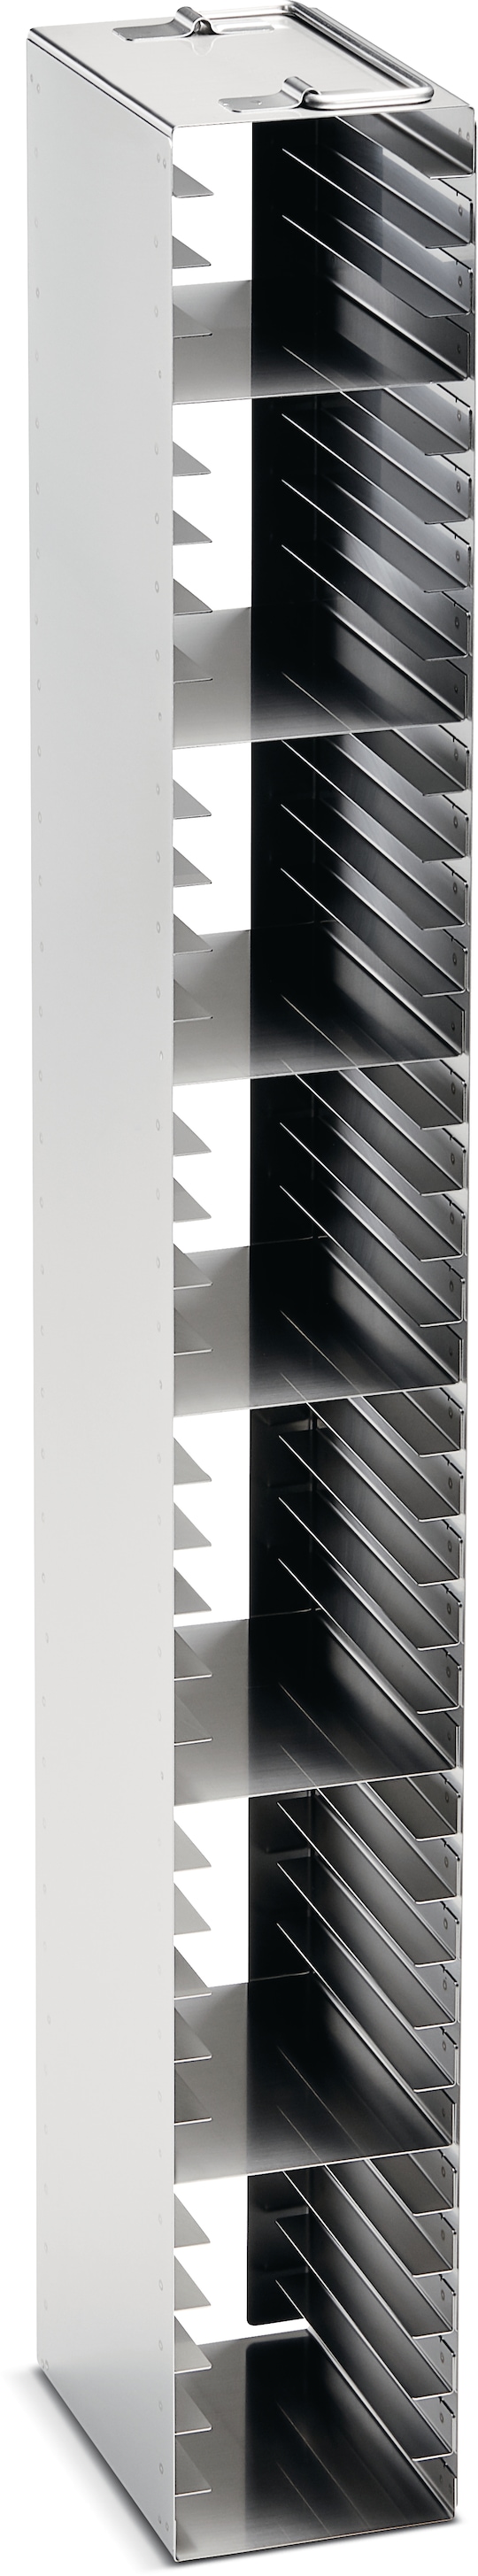 Metal tower rack for MTP in Eppendorf CryoCube® ULT chest freezer - (6001050010)